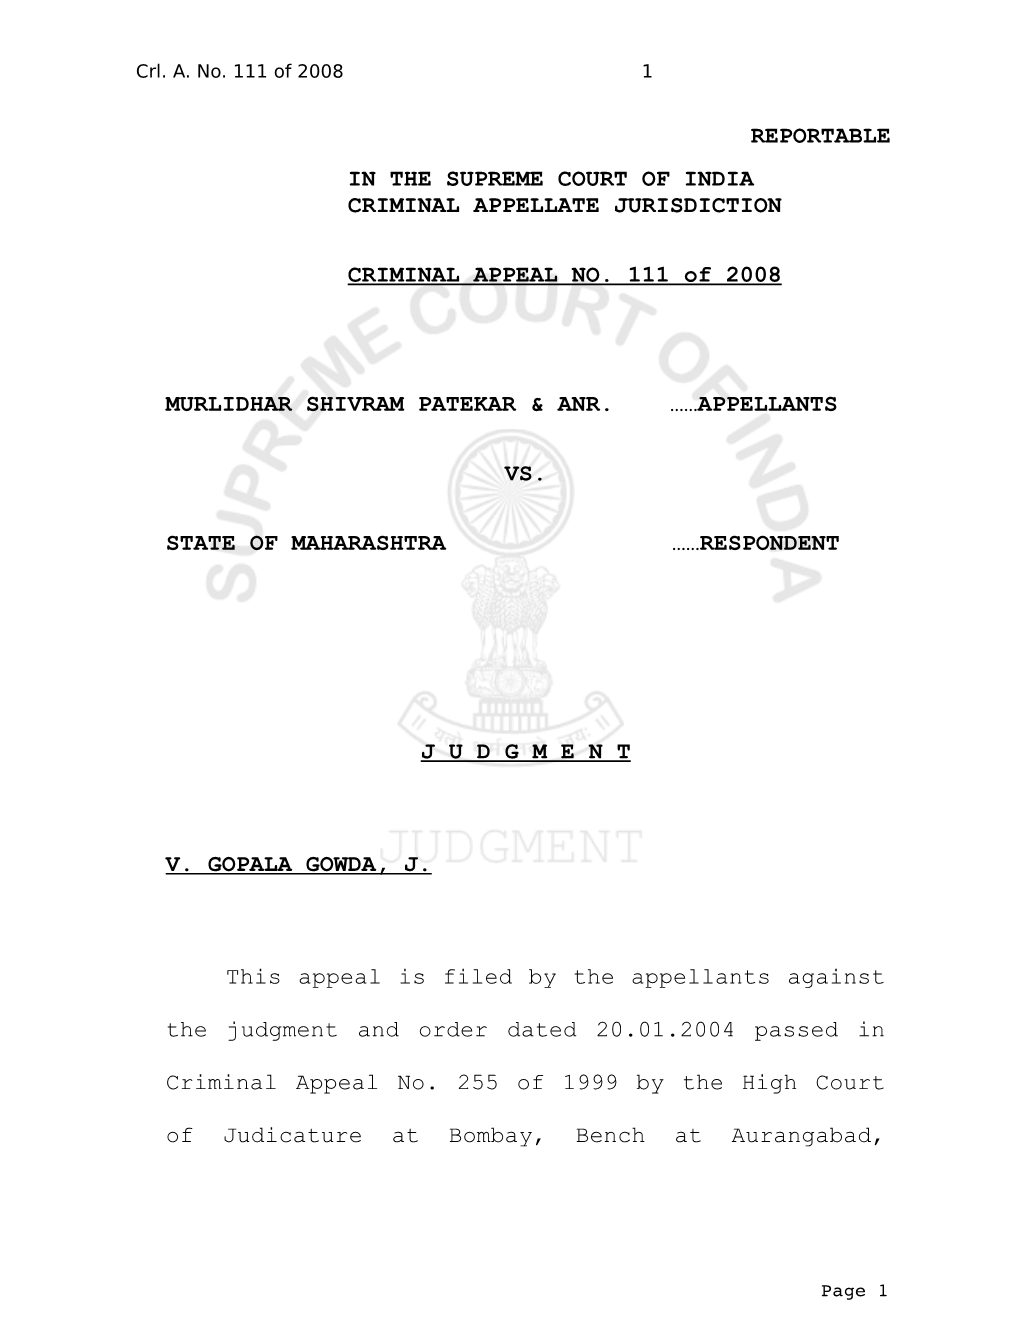 Reportable in the Supreme Court of India Criminal Appellate Jurisdiction